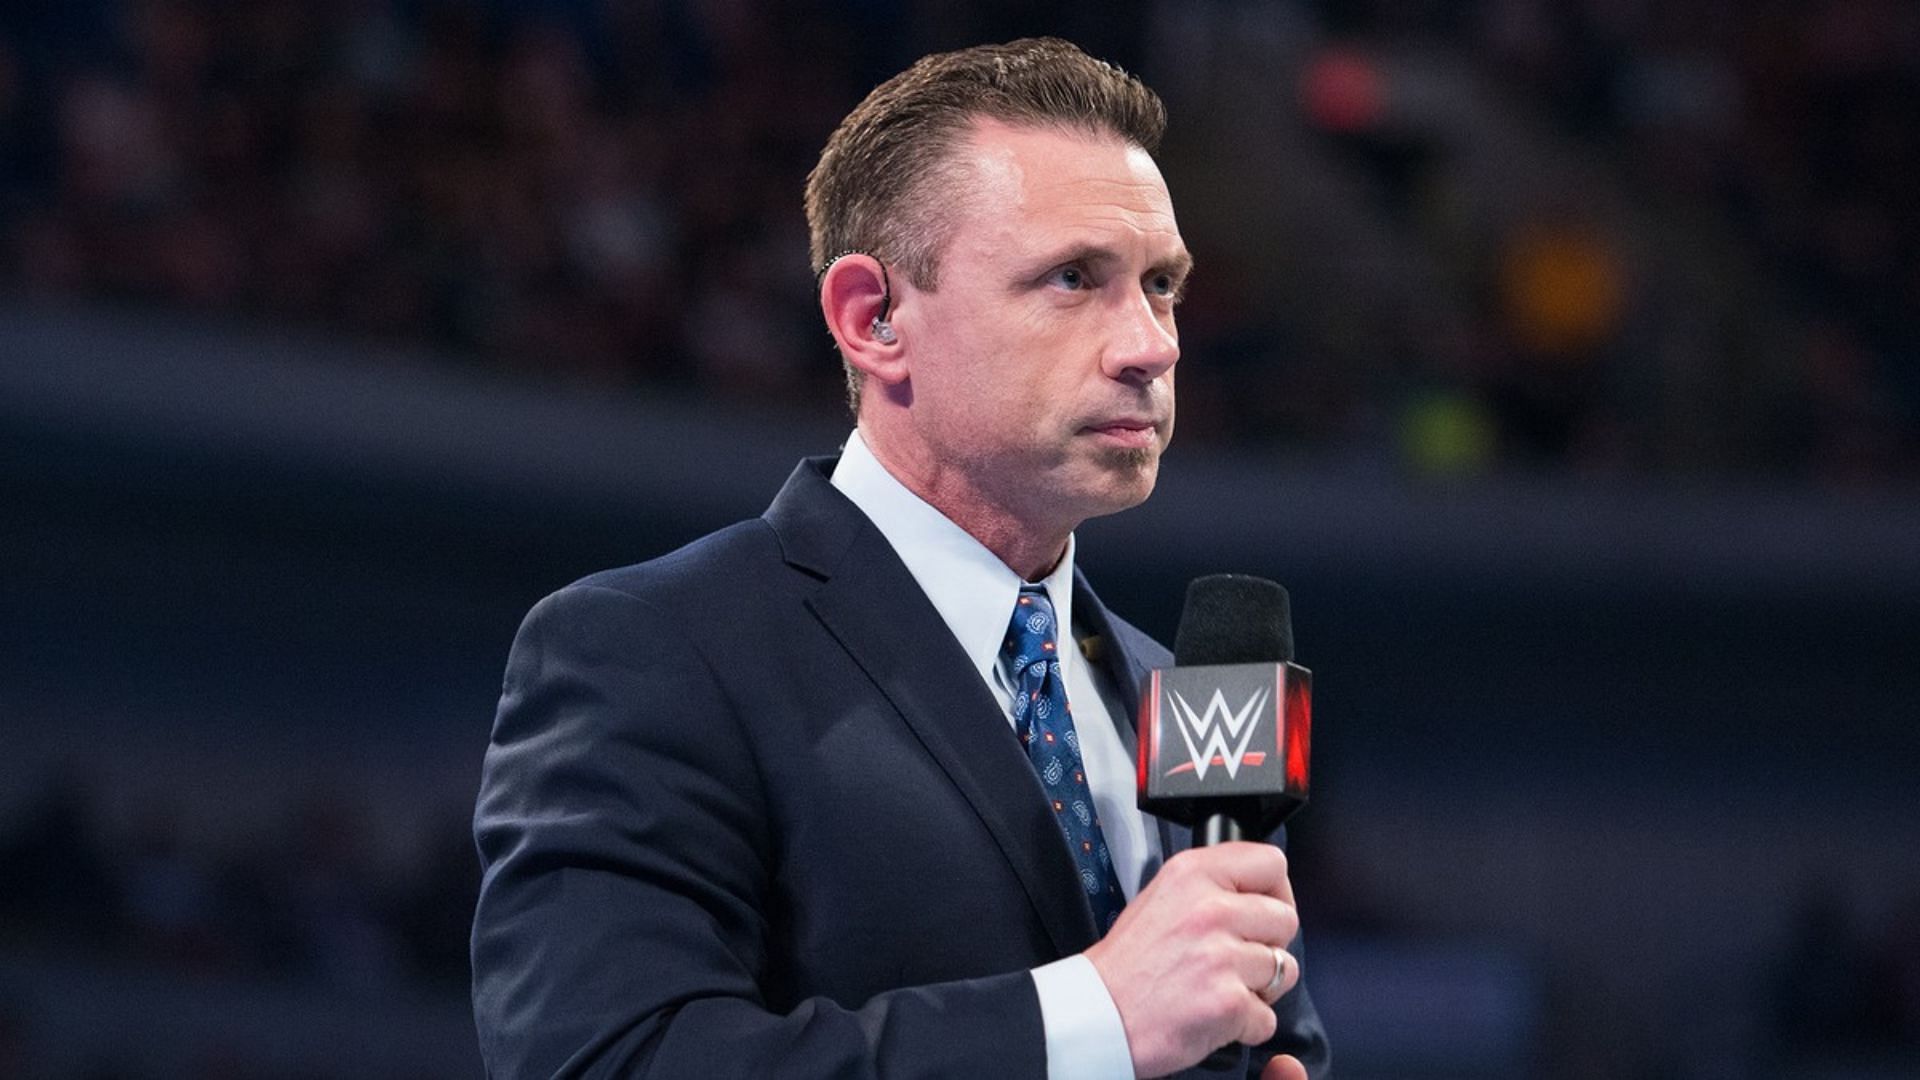 Michael Cole is an underrated commentator in WWE